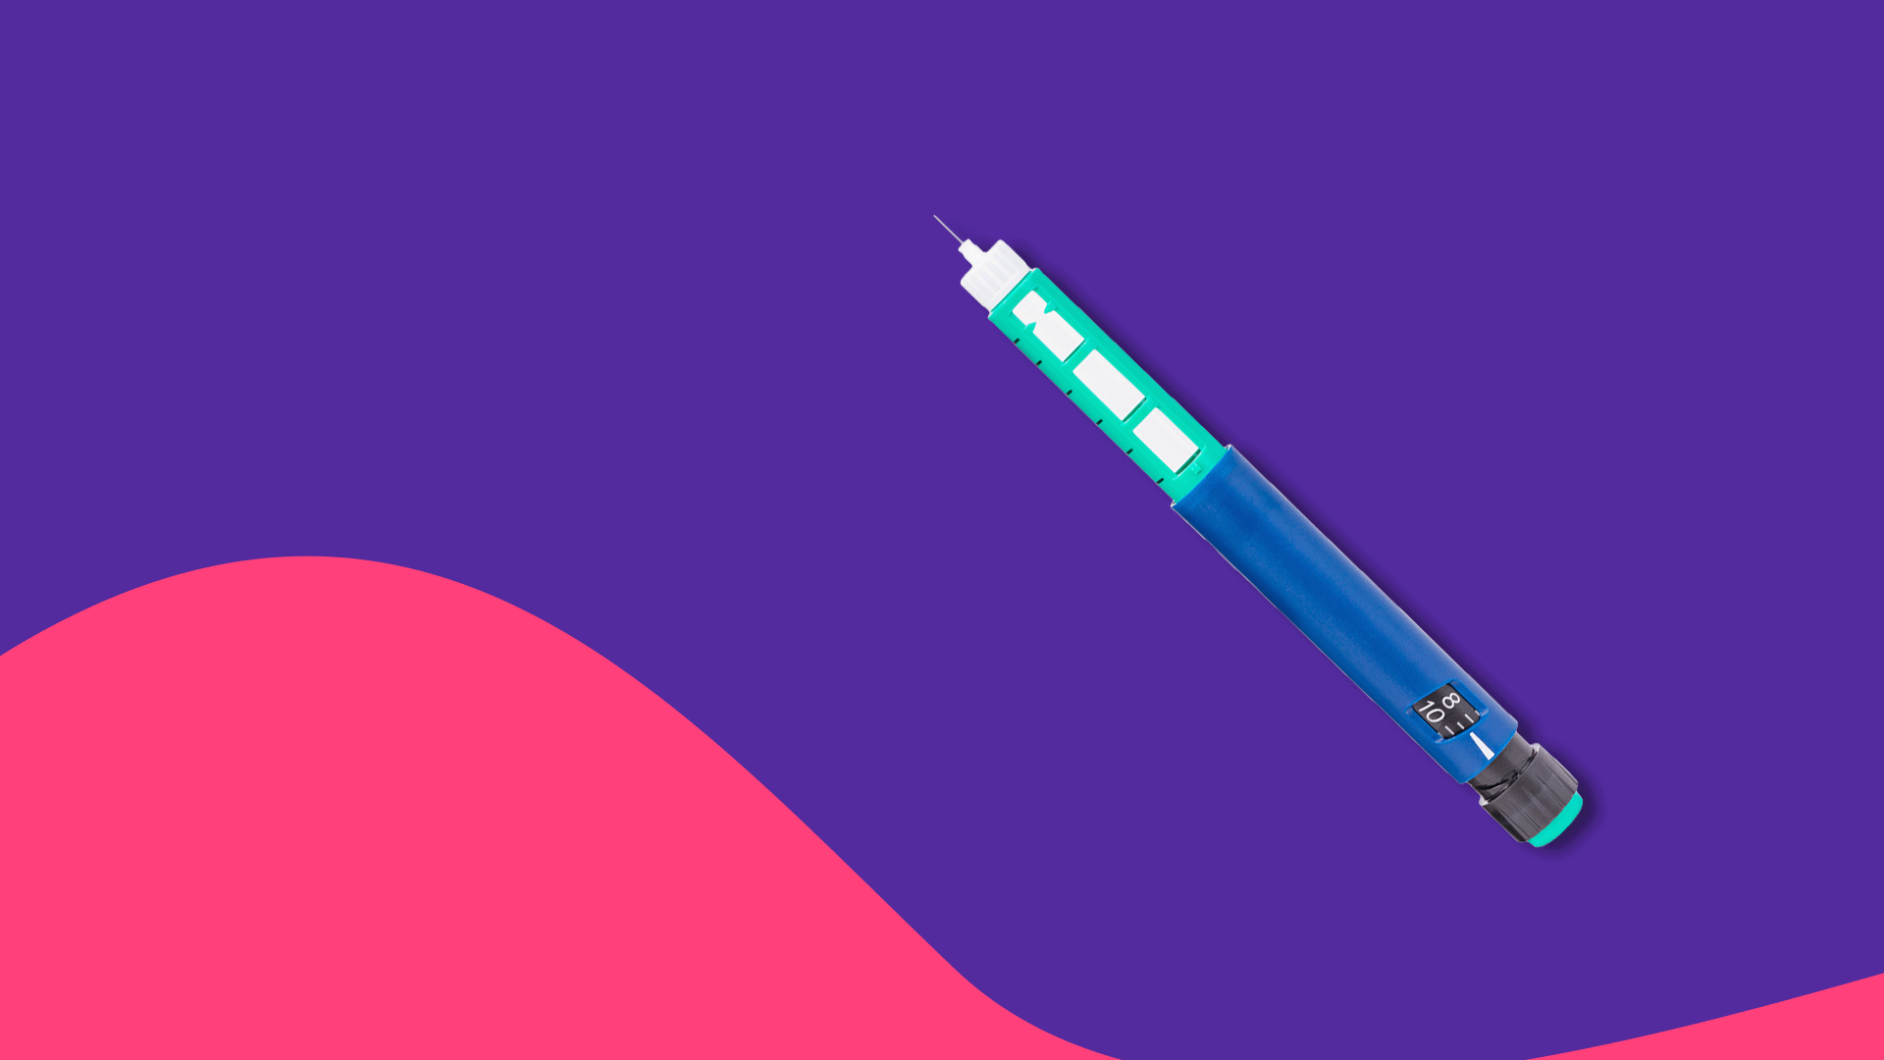 A pen used to deliver injectable medication: How to get free Mounjaro samples